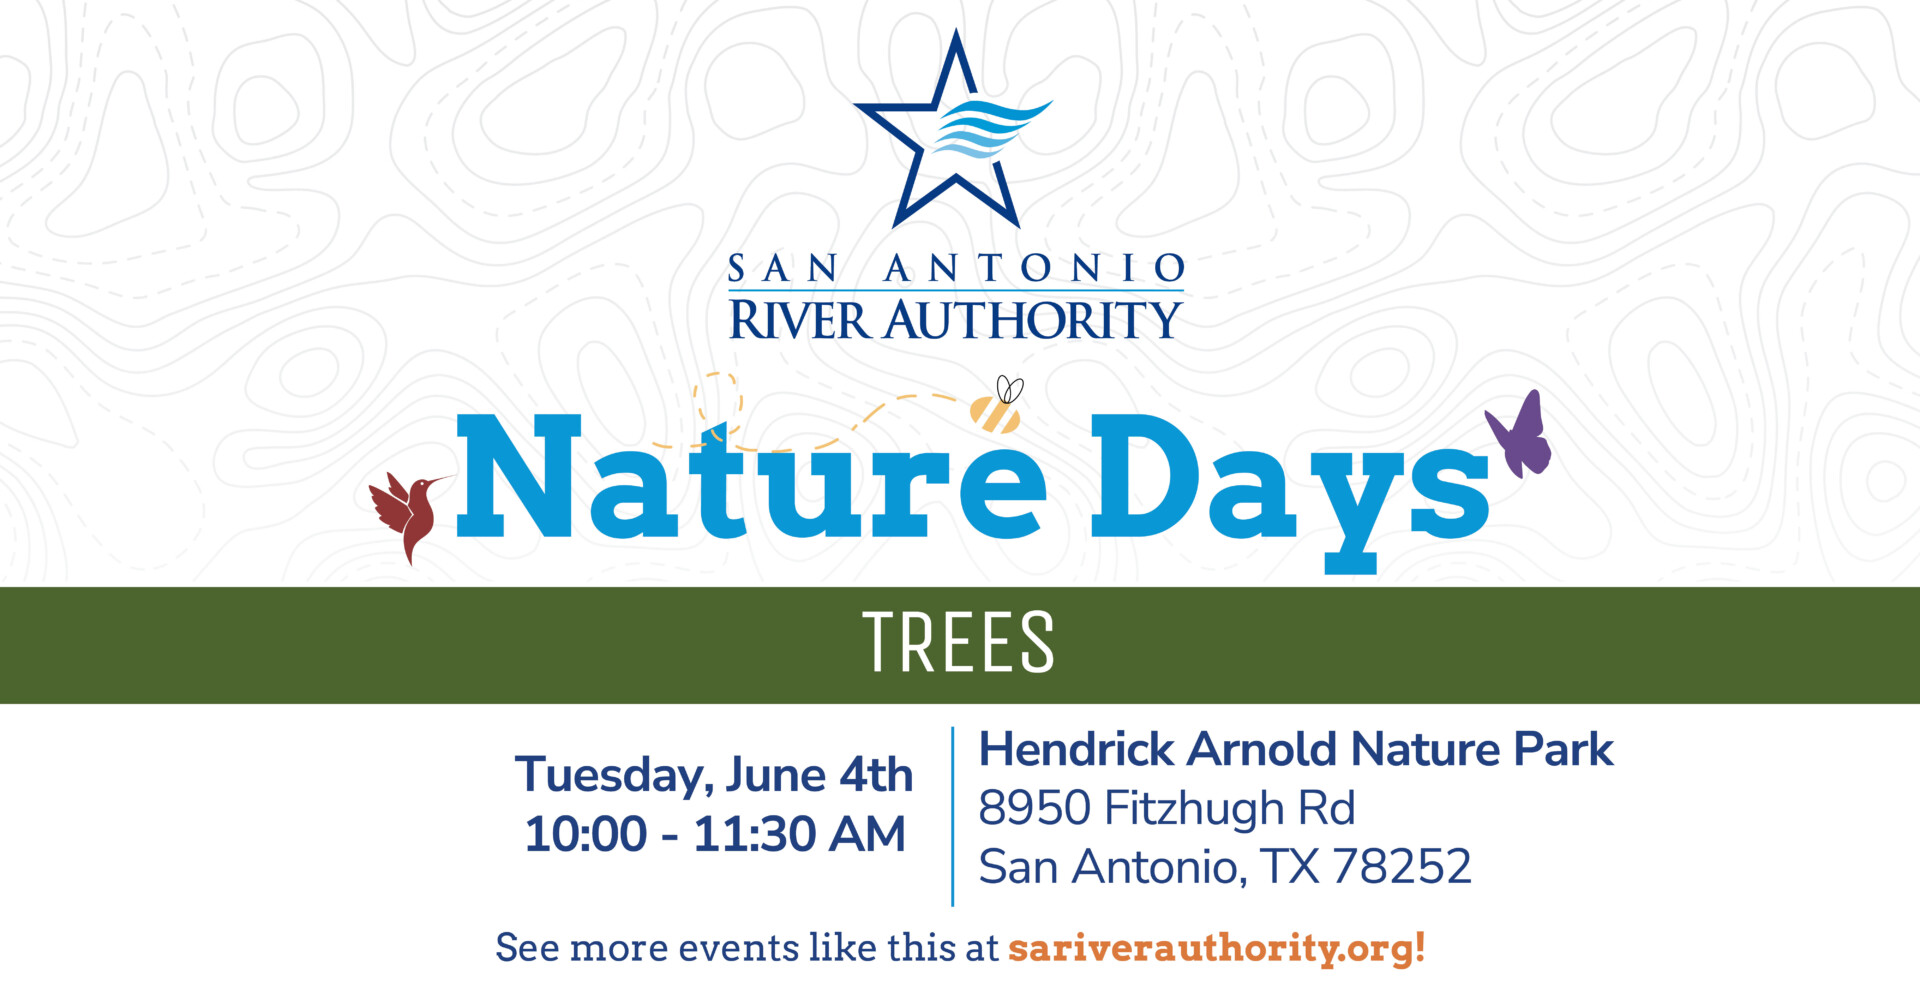 Nature Days - Trees